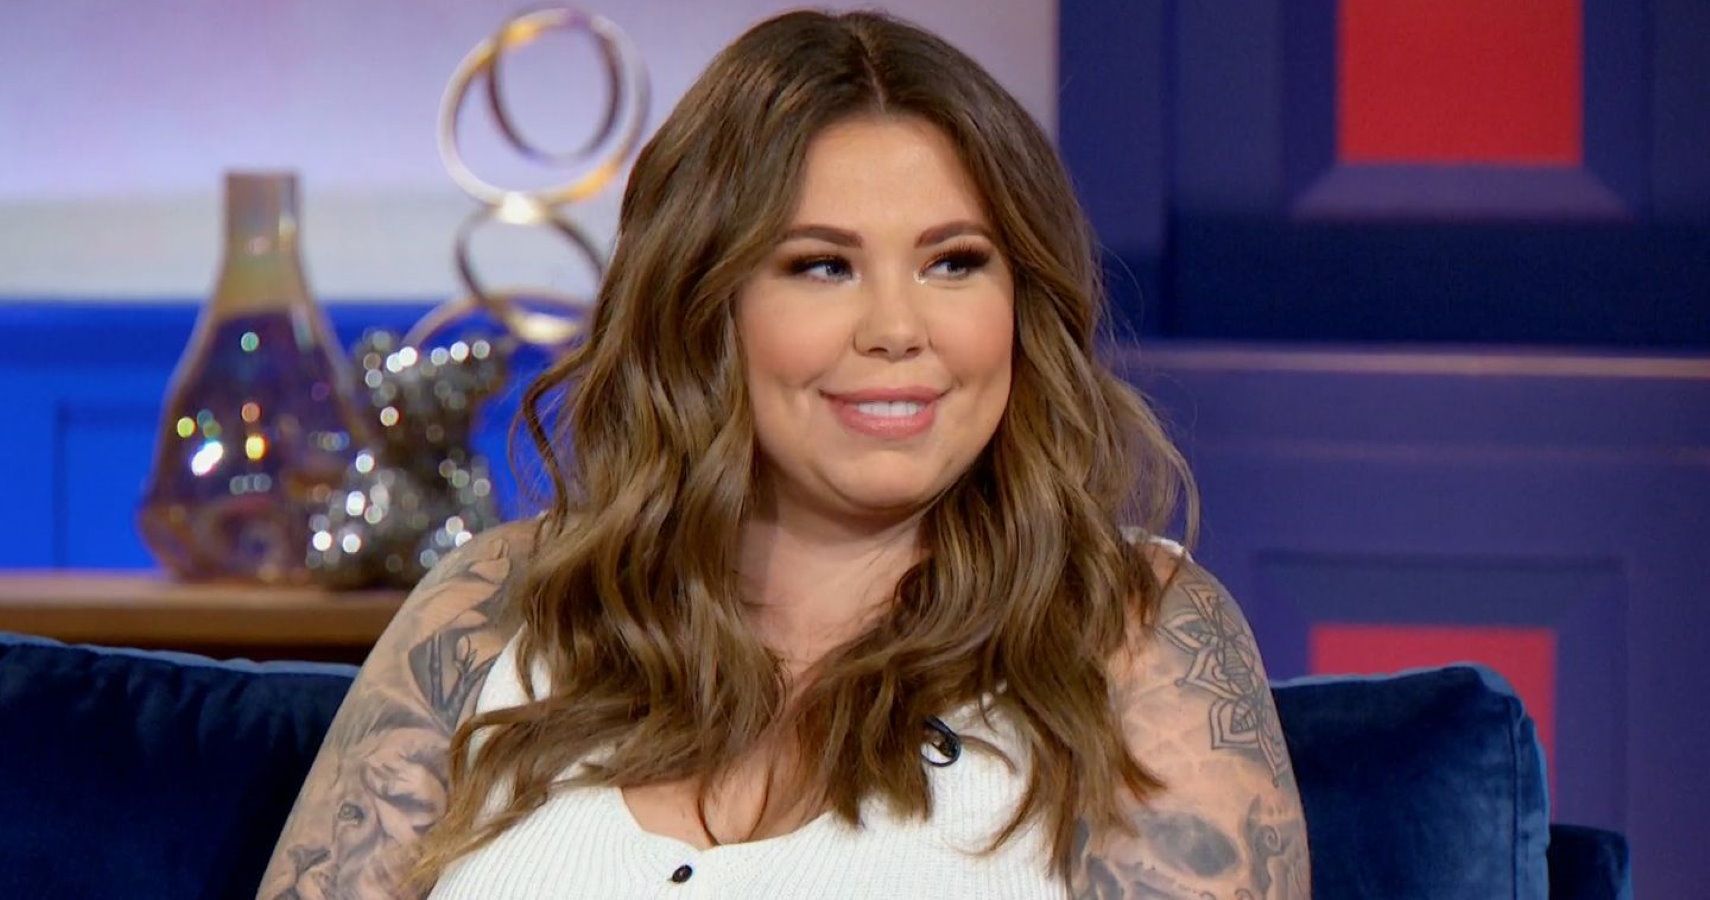 Teen Mom 2 Star Kailyn Lowry Pregnant With Baby Number Four